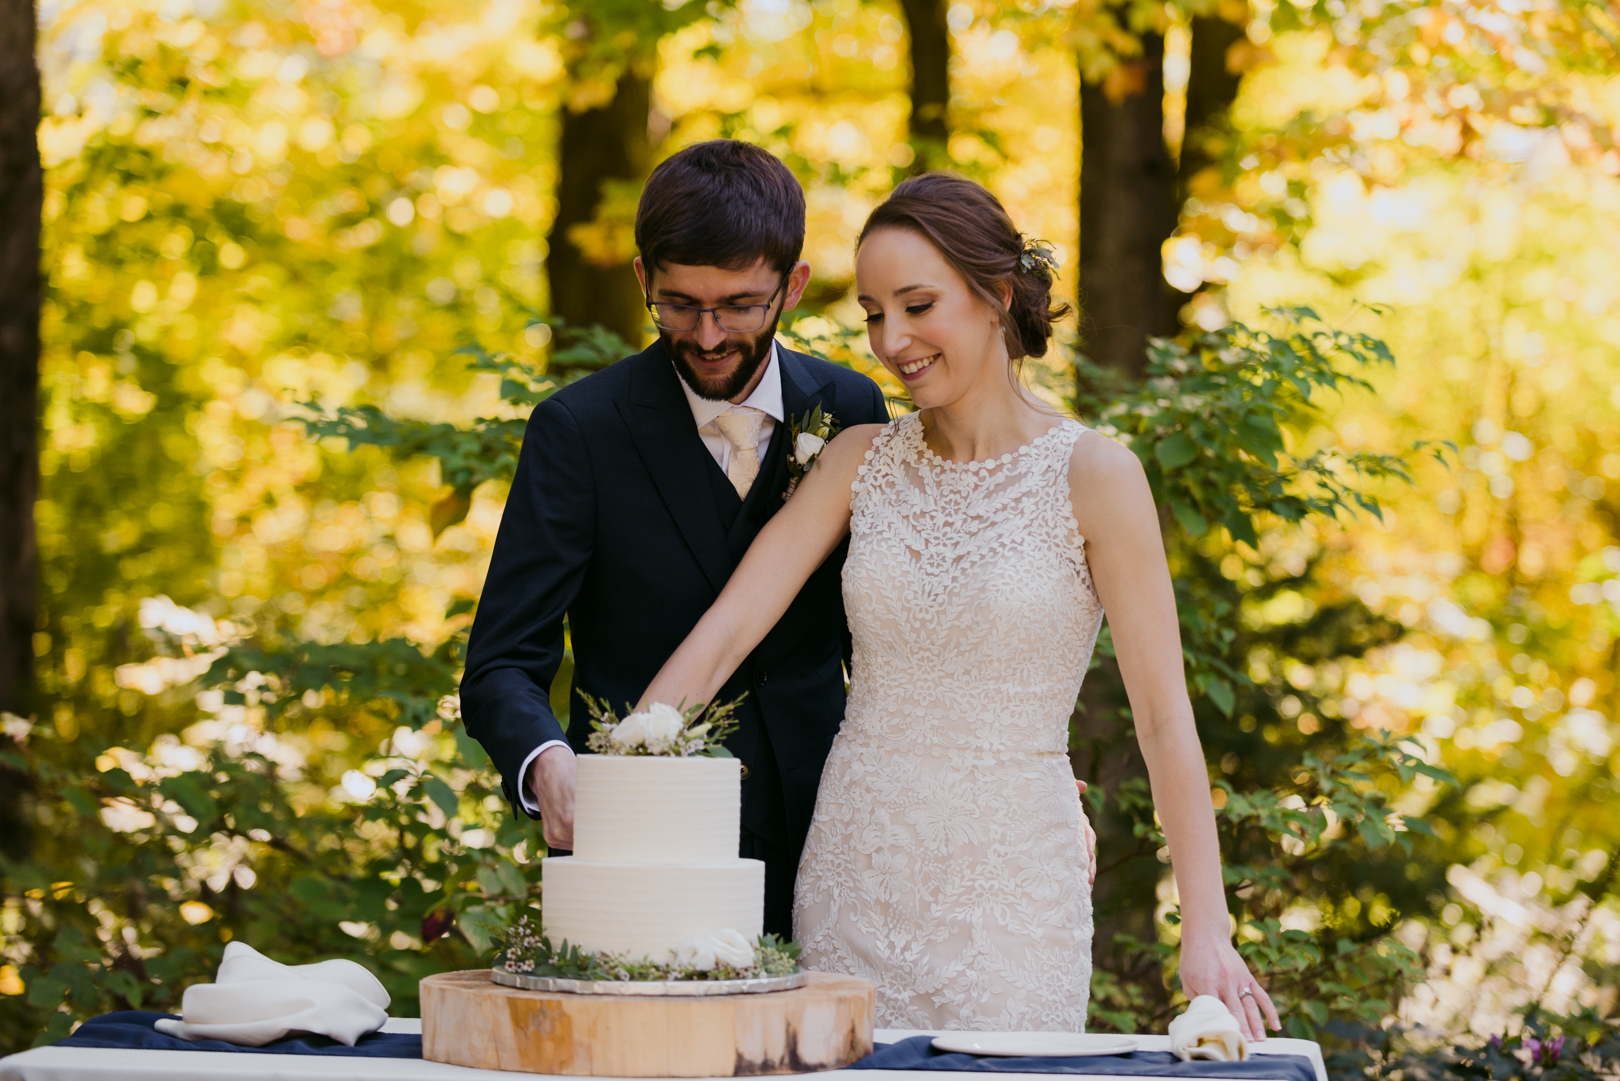 bride and groom cutting cake outside